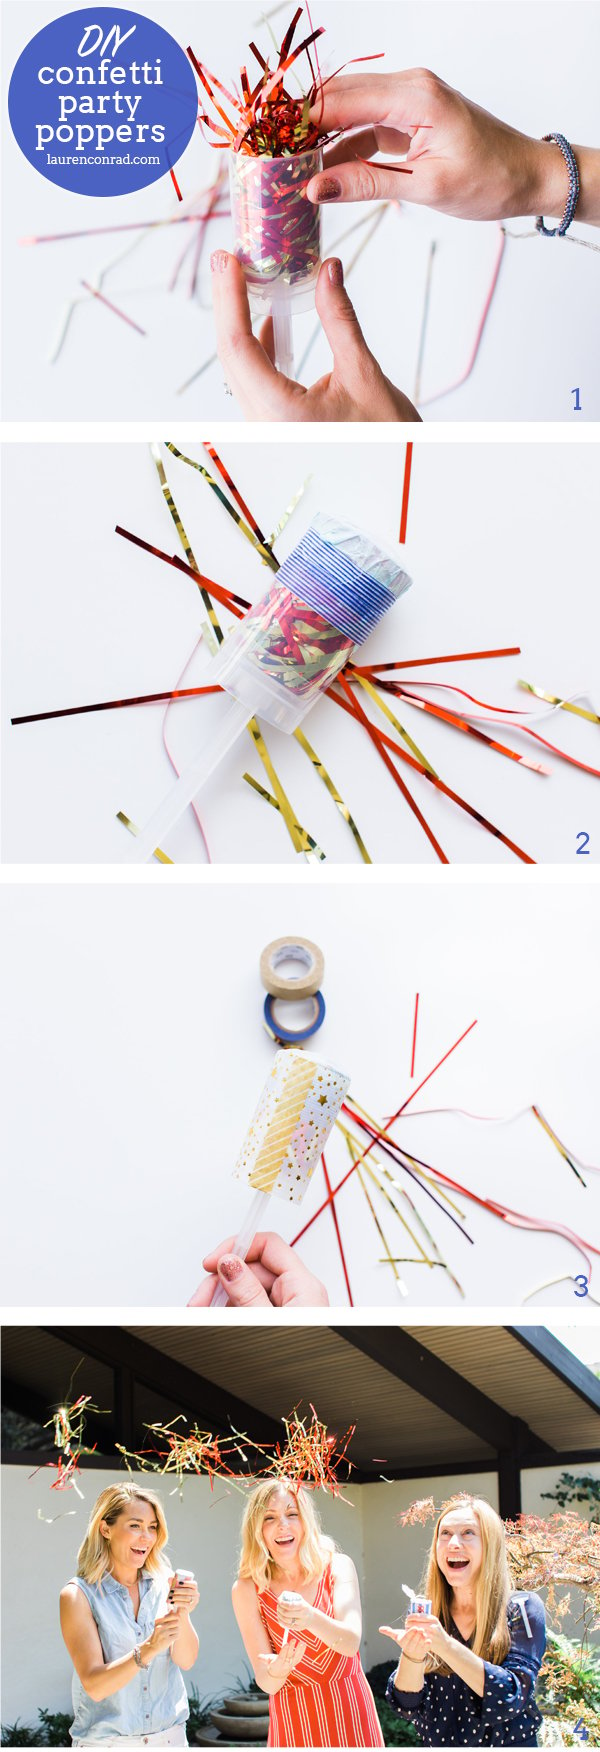 How to create your own confetti party poppers!